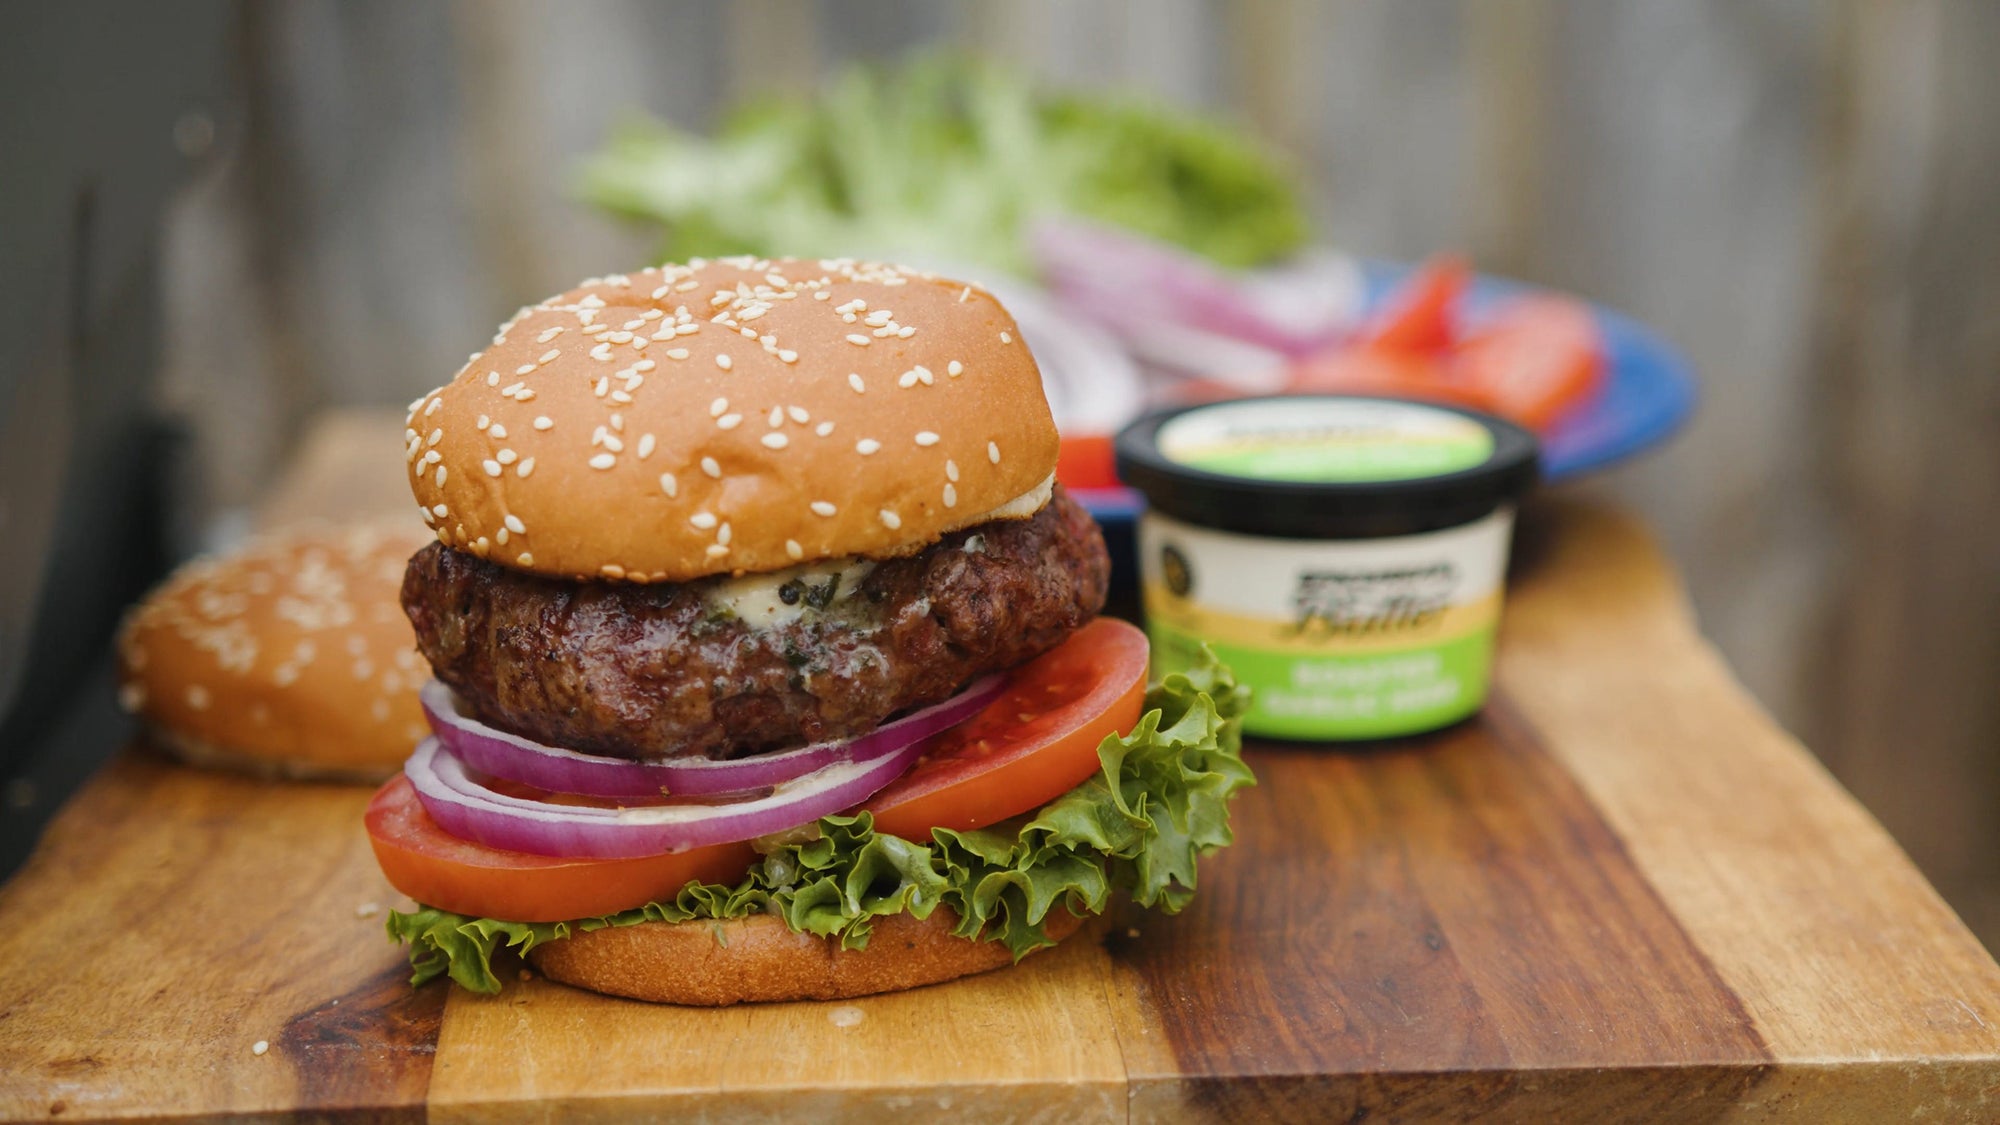 Butter Burgers made with Epicurean Butter Roasted Garlic Herb Flavored Butter